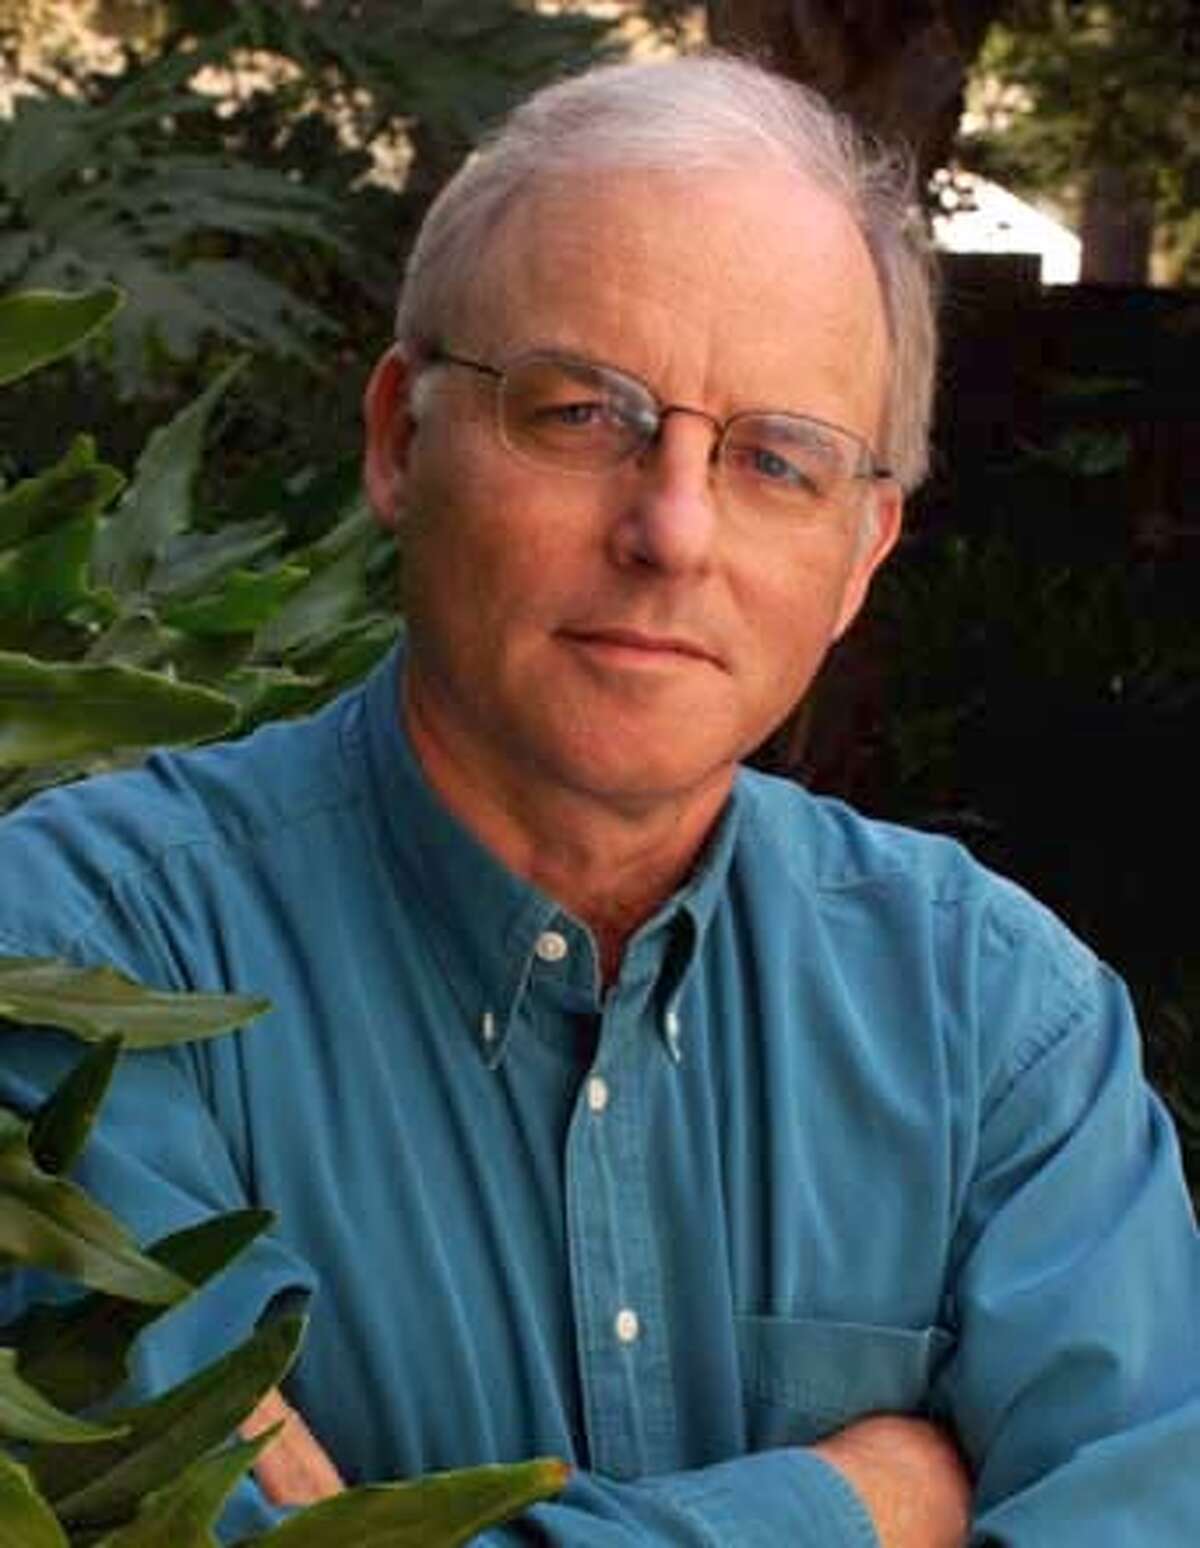 Headshot of Richard Louv, author of LAST CHILD IN THE WOODS, and chairman of The Children and Nature Network (www.cnaturenet.org).